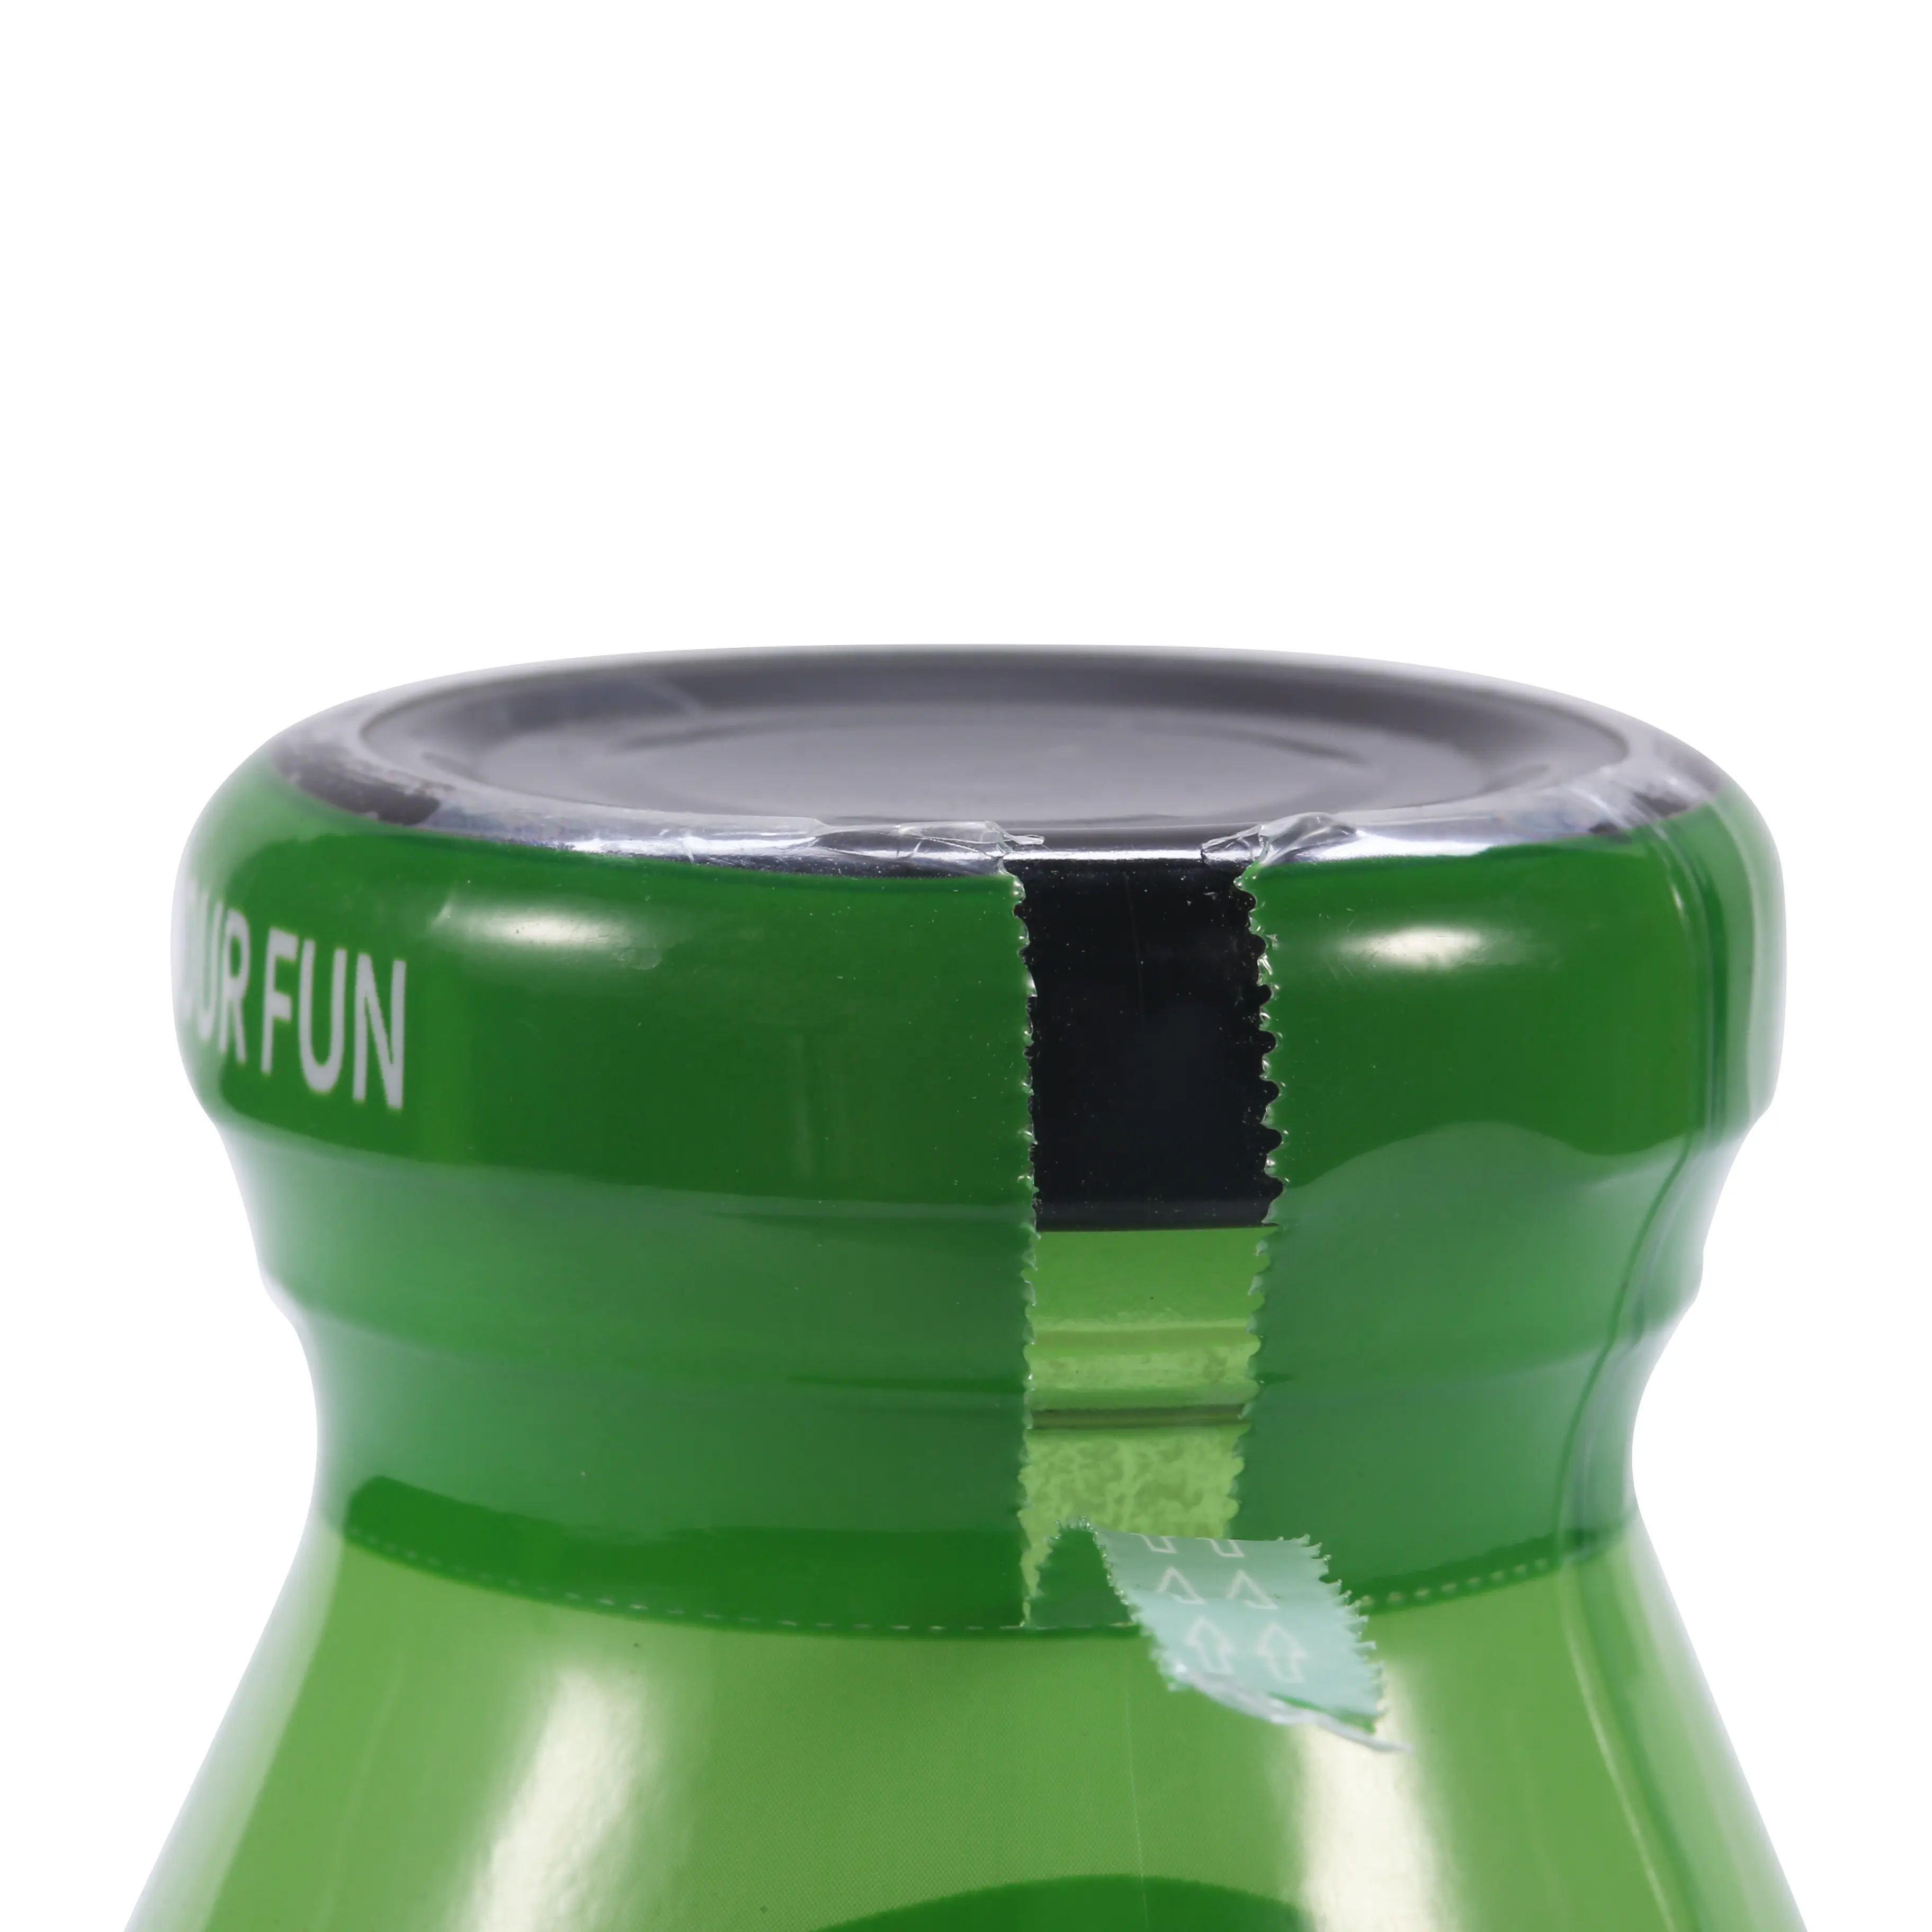 Take easy tear line Printed sleeve film for the Beverage bottle or cans/cups